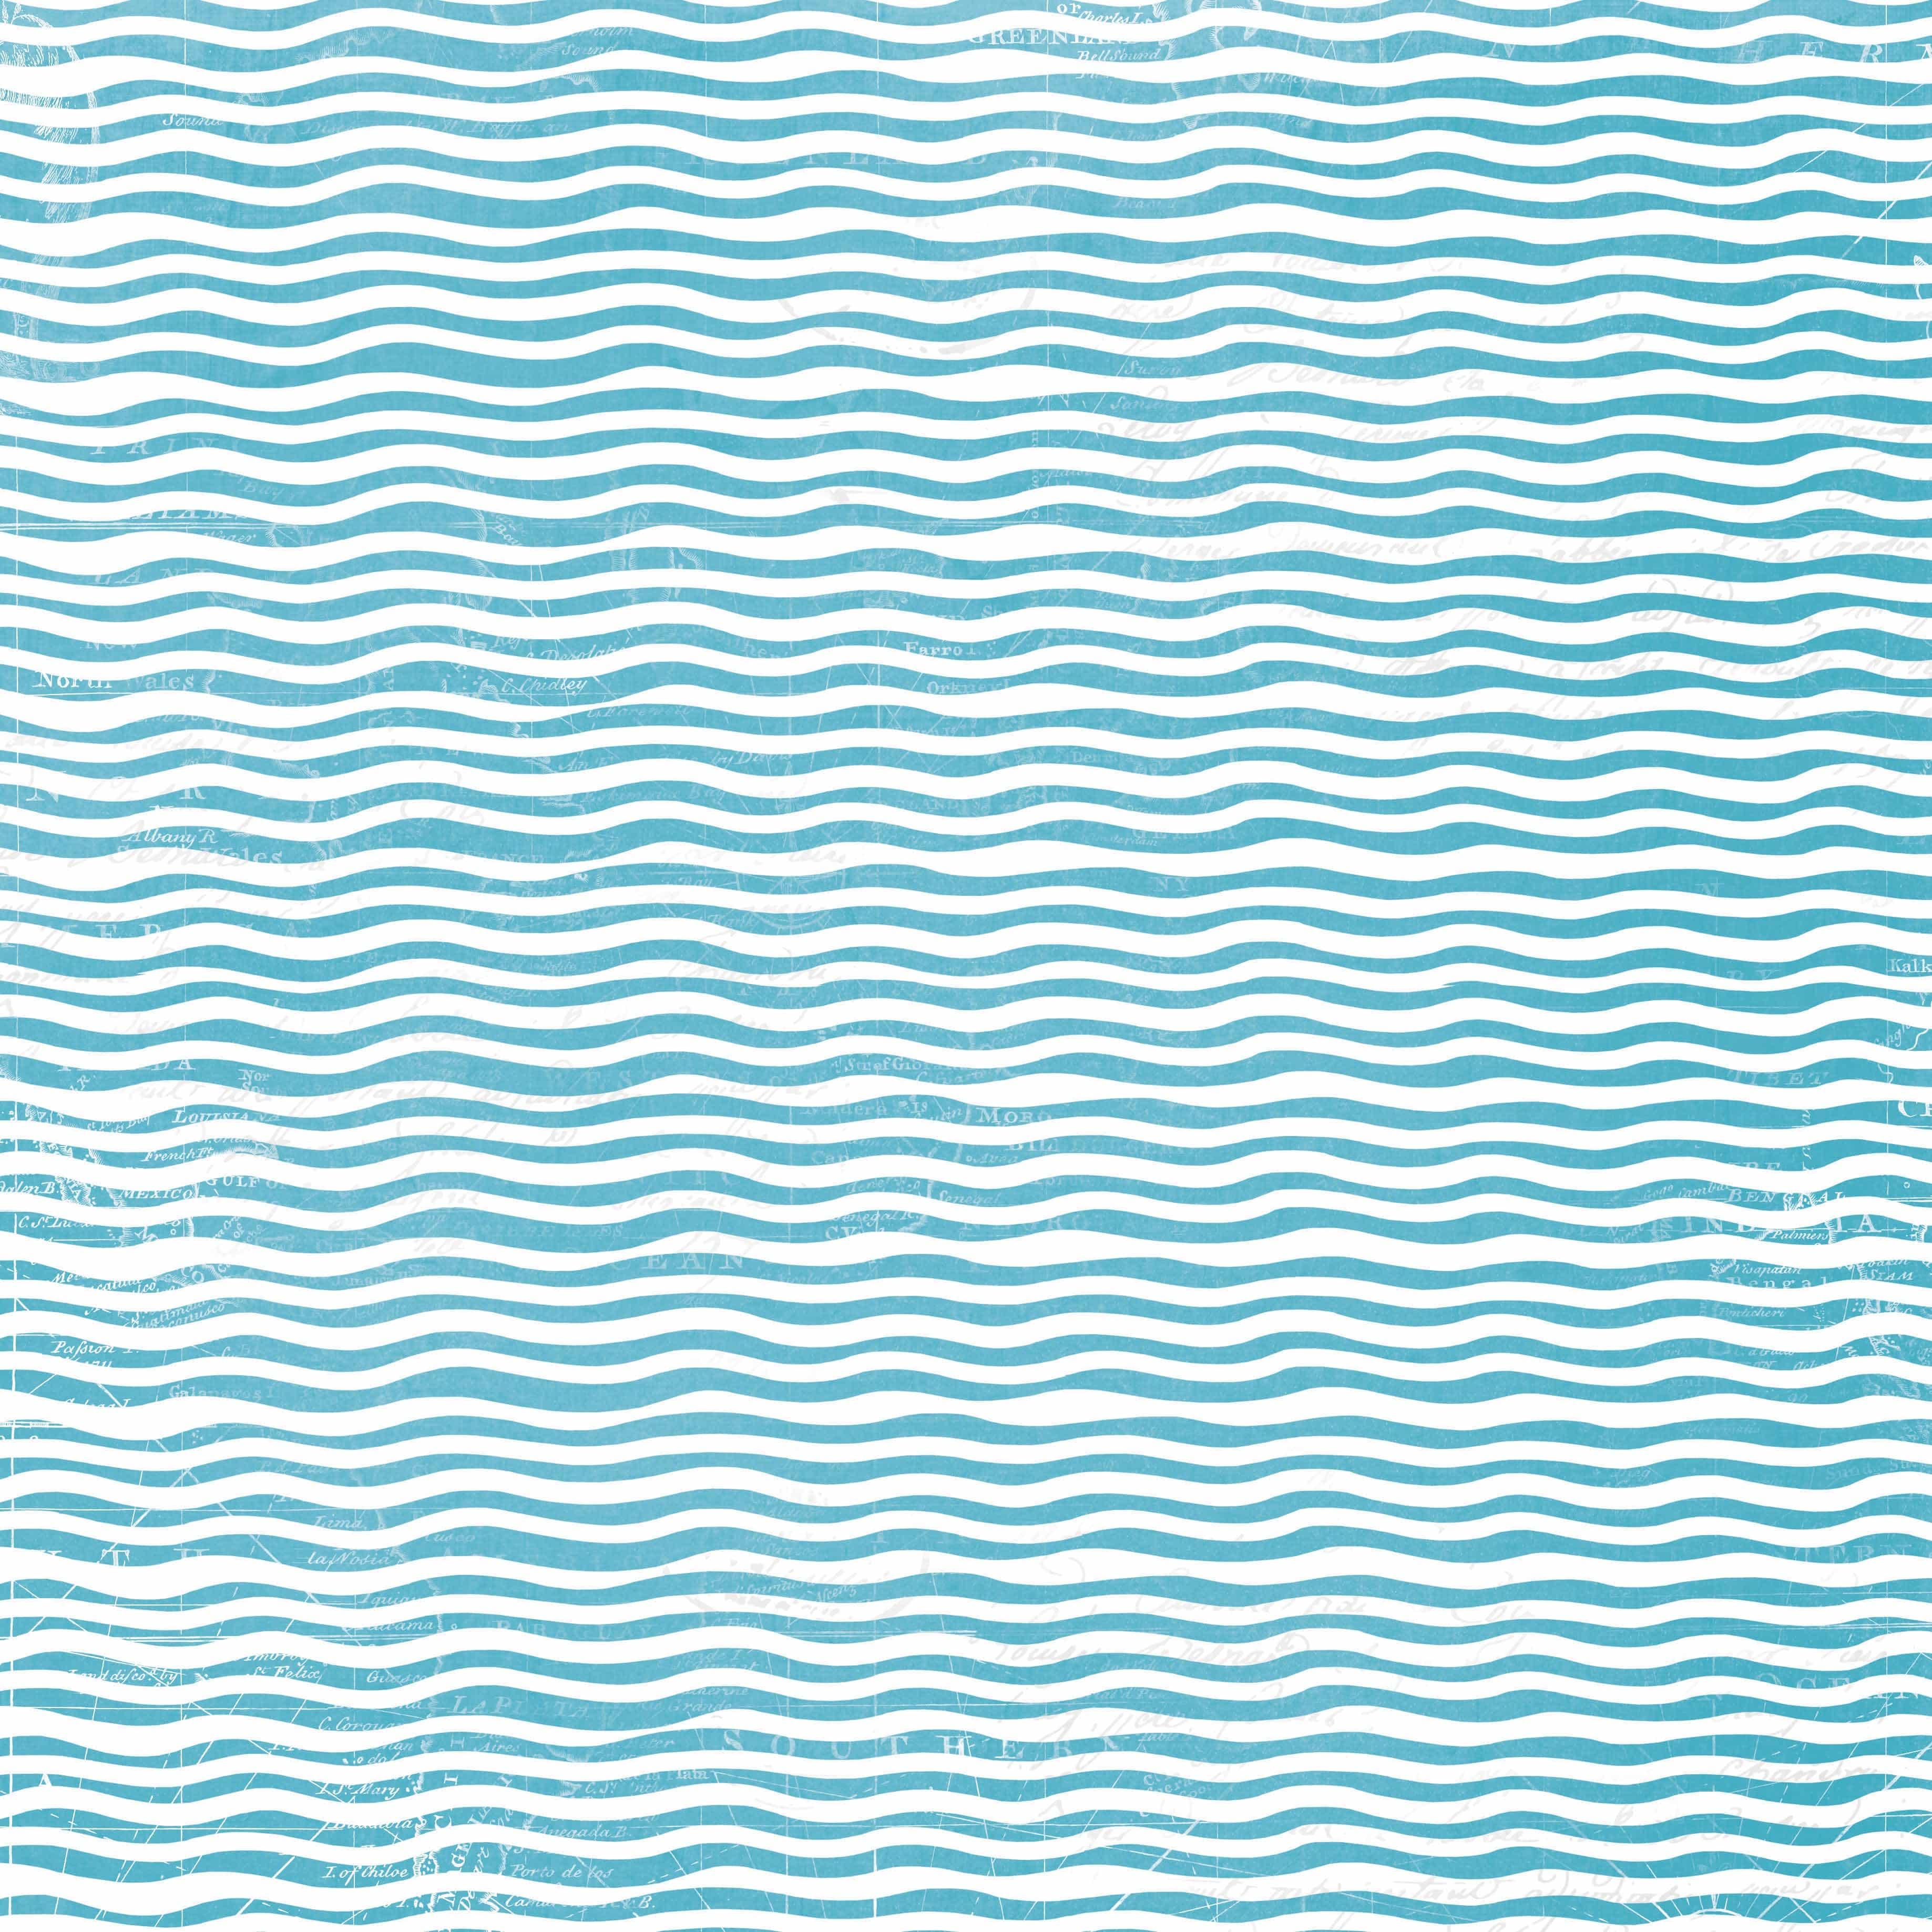 Vintage Seas Collection Surf, Sea & Sand 12 x 12 Double-Sided Scrapbook Paper by Simple Stories - Scrapbook Supply Companies